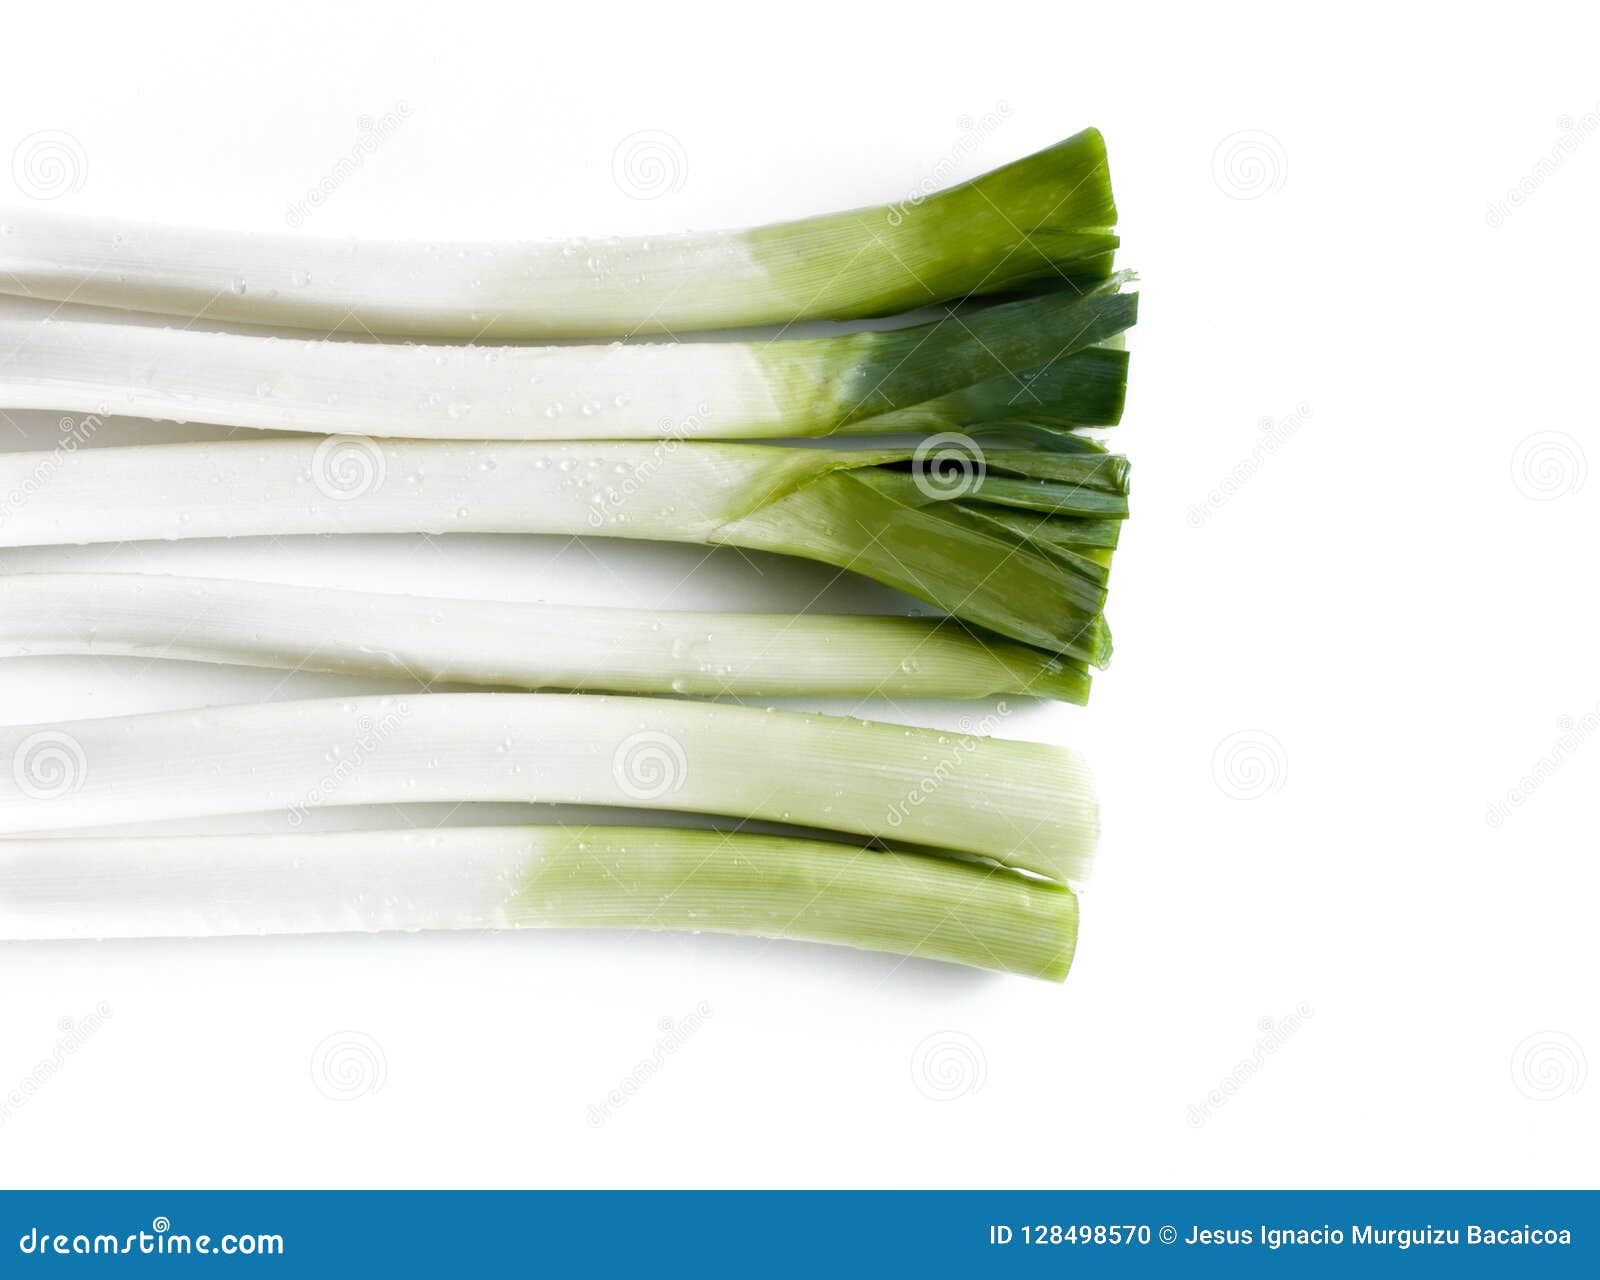 aerial view of a bunch of leeks on a white table